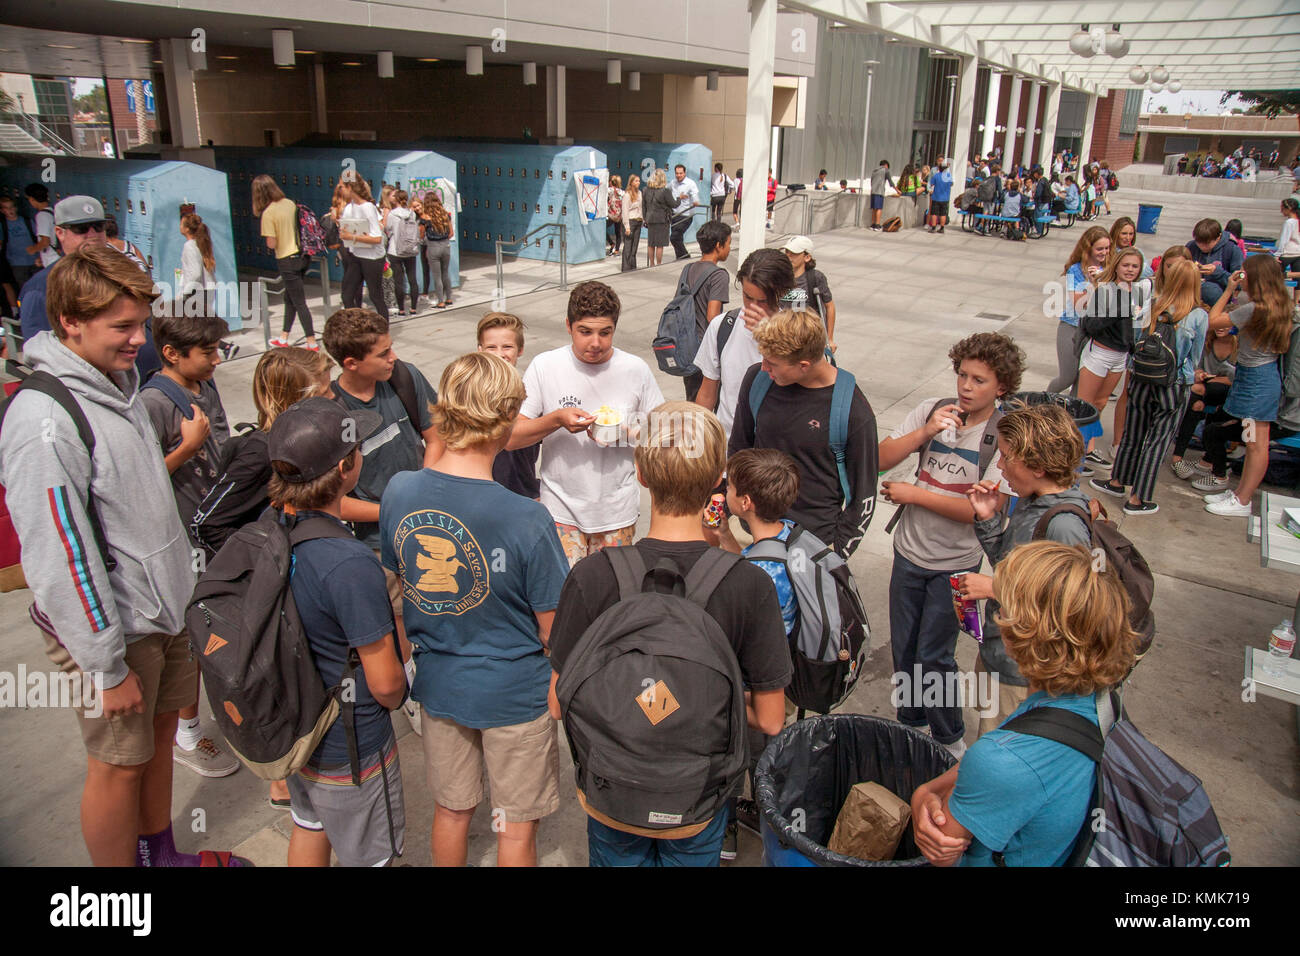 Newport Beach, CA, middle school students converse in a "cell phone free"  yard during recess while one them sneaks the use of a phone anyway. Note  signs in background Stock Photo -